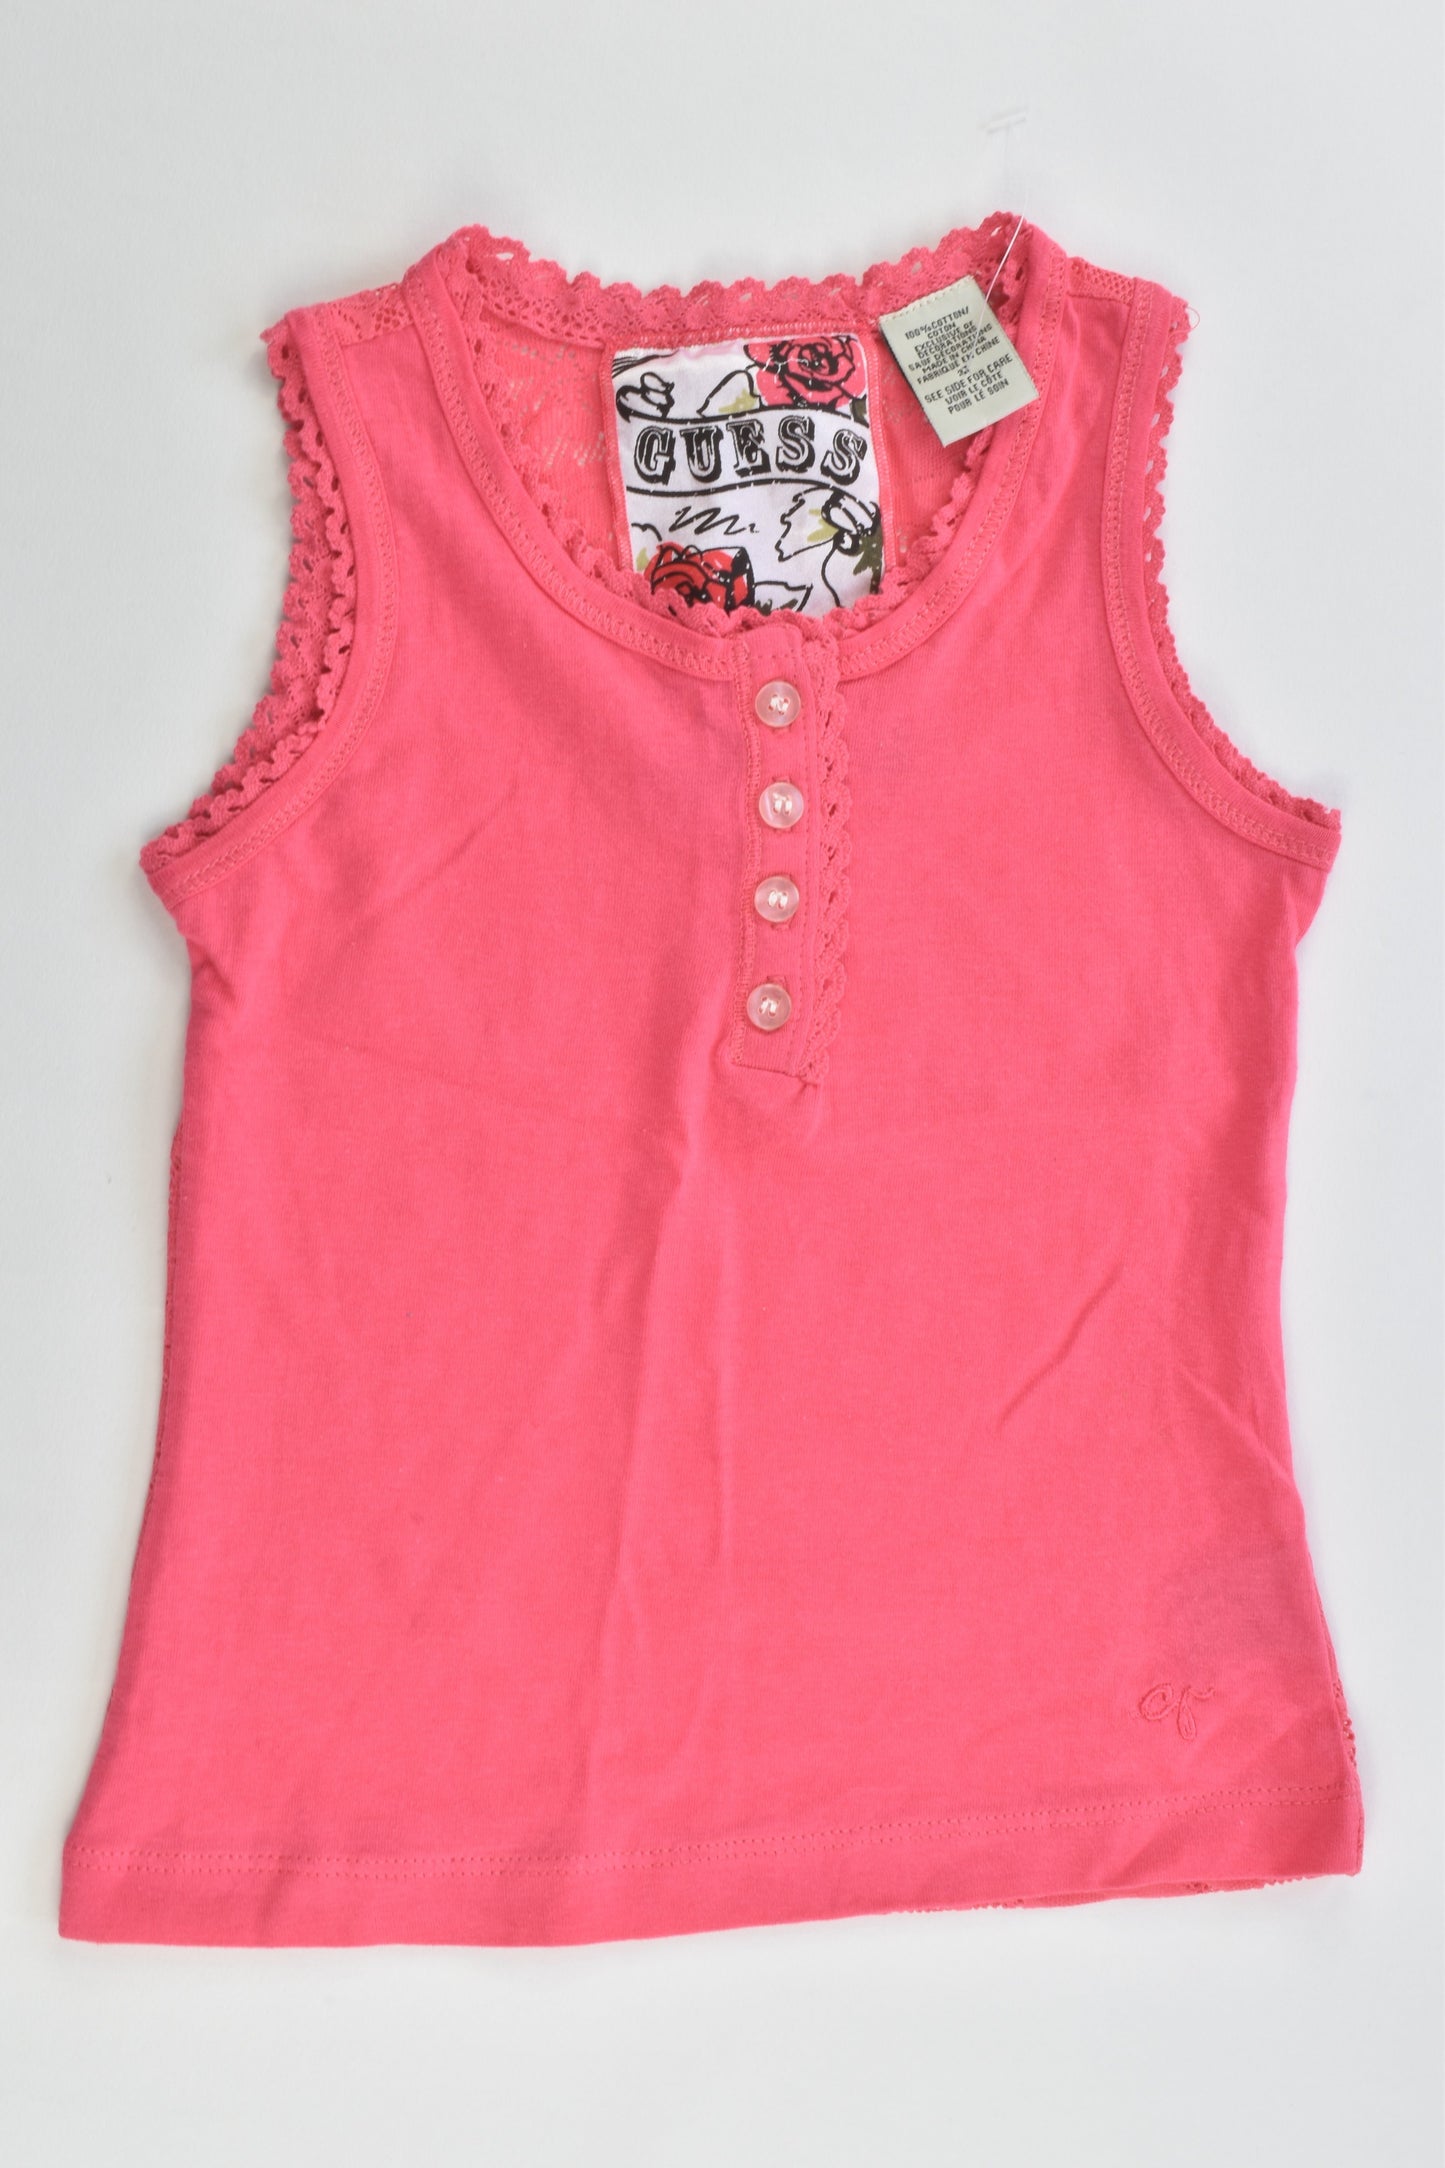 NEW Guess Size 3 Top